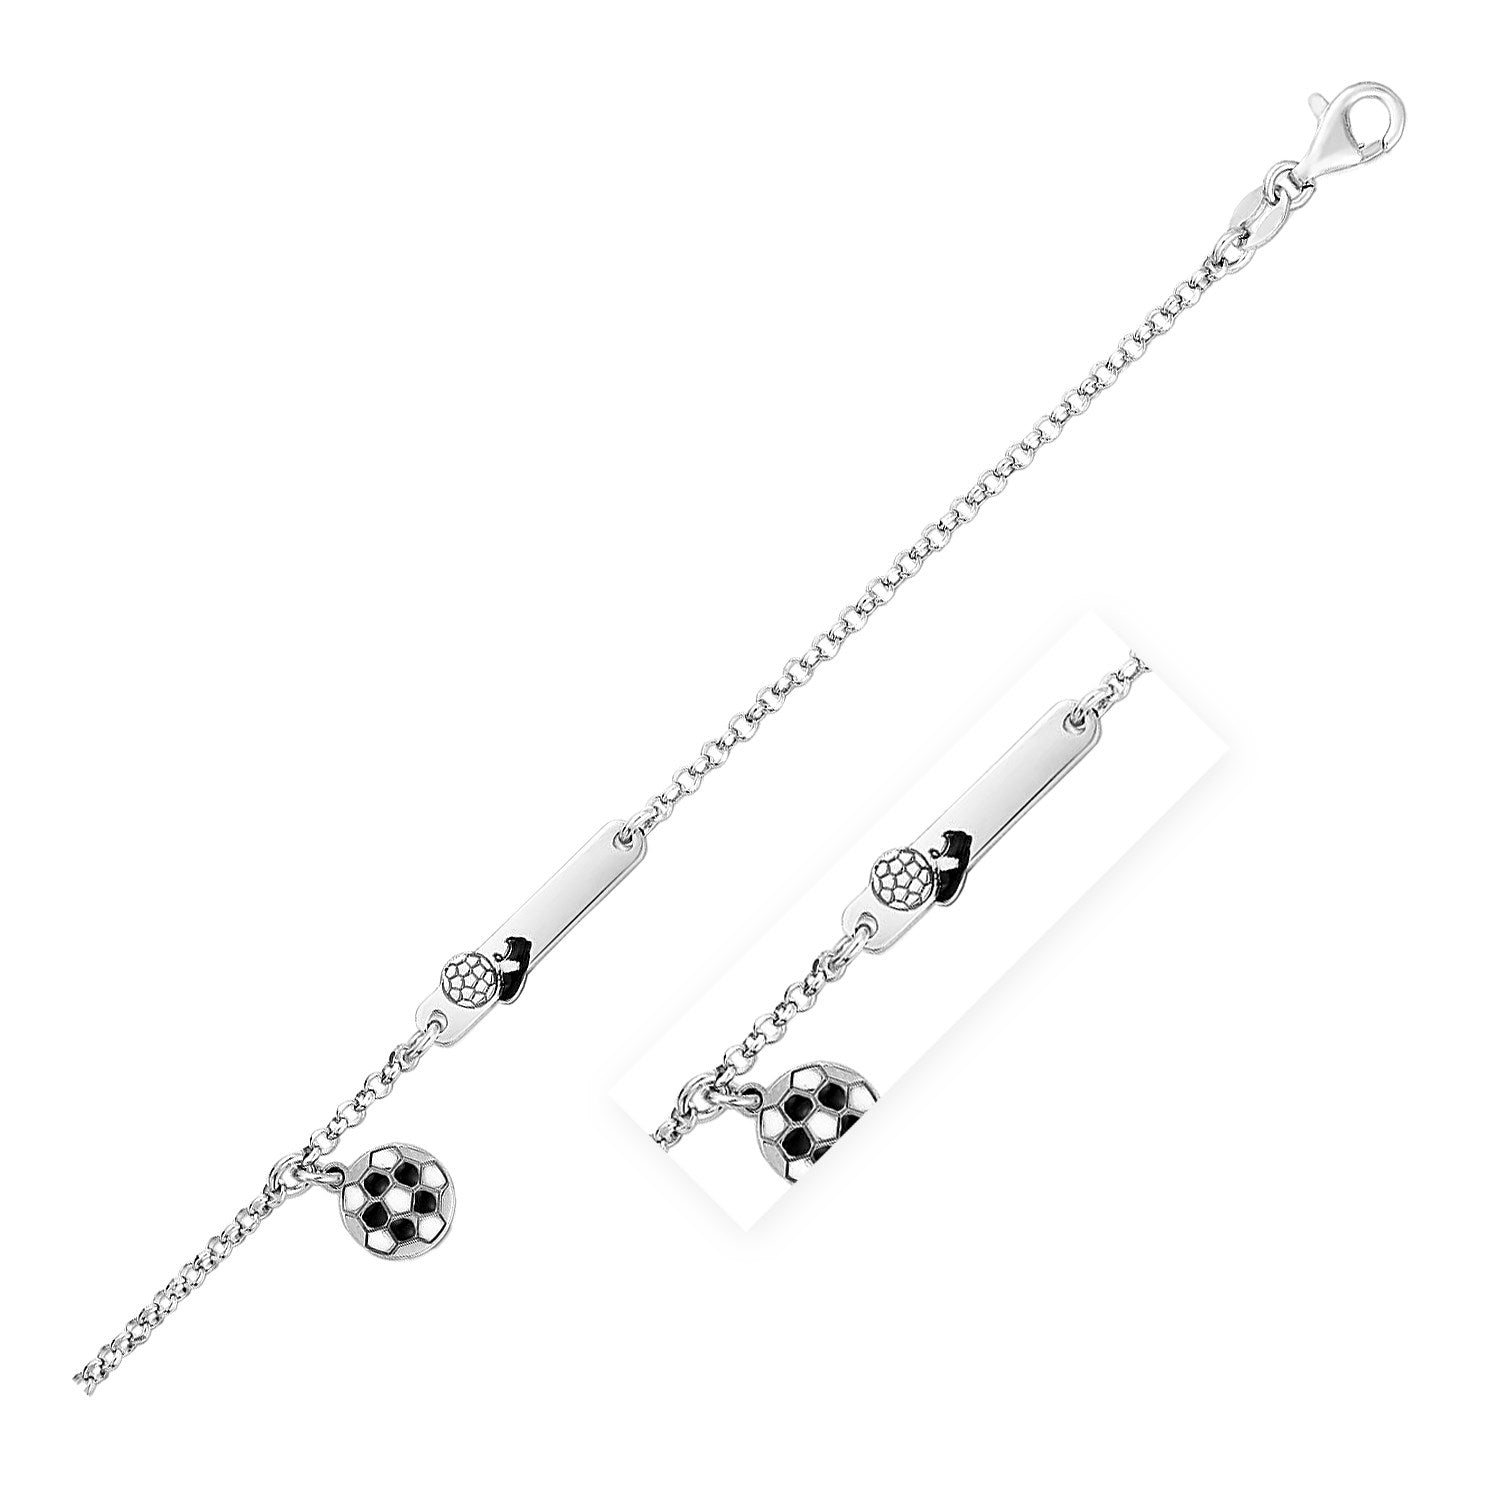 Sterling Silver Childs Identification Bracelet with Soccer Ball Charm